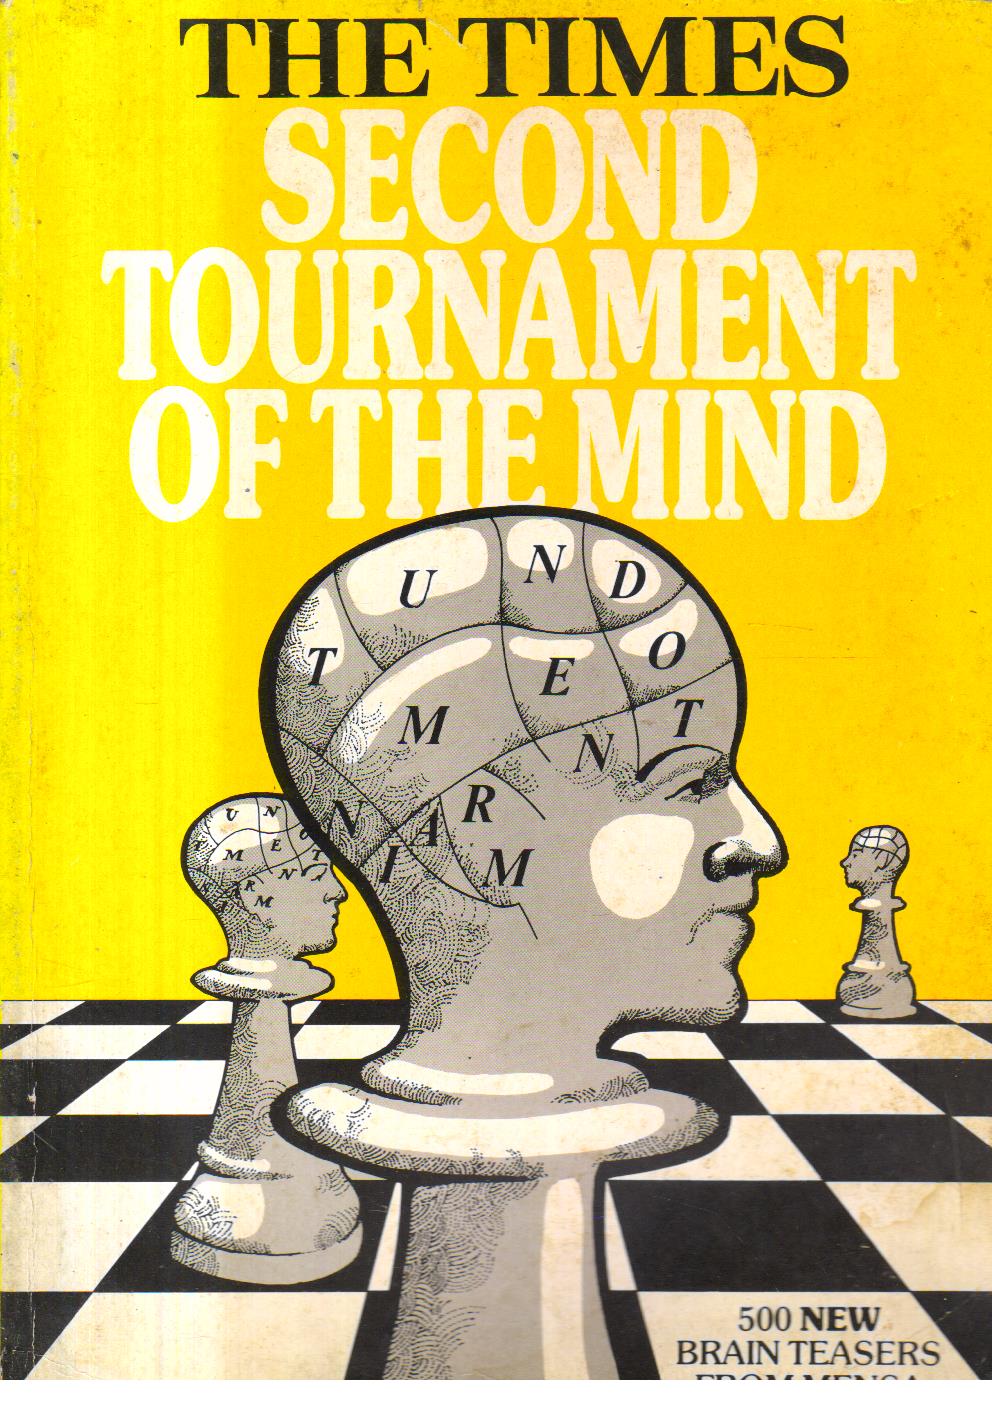 Second Tournament of the Mind